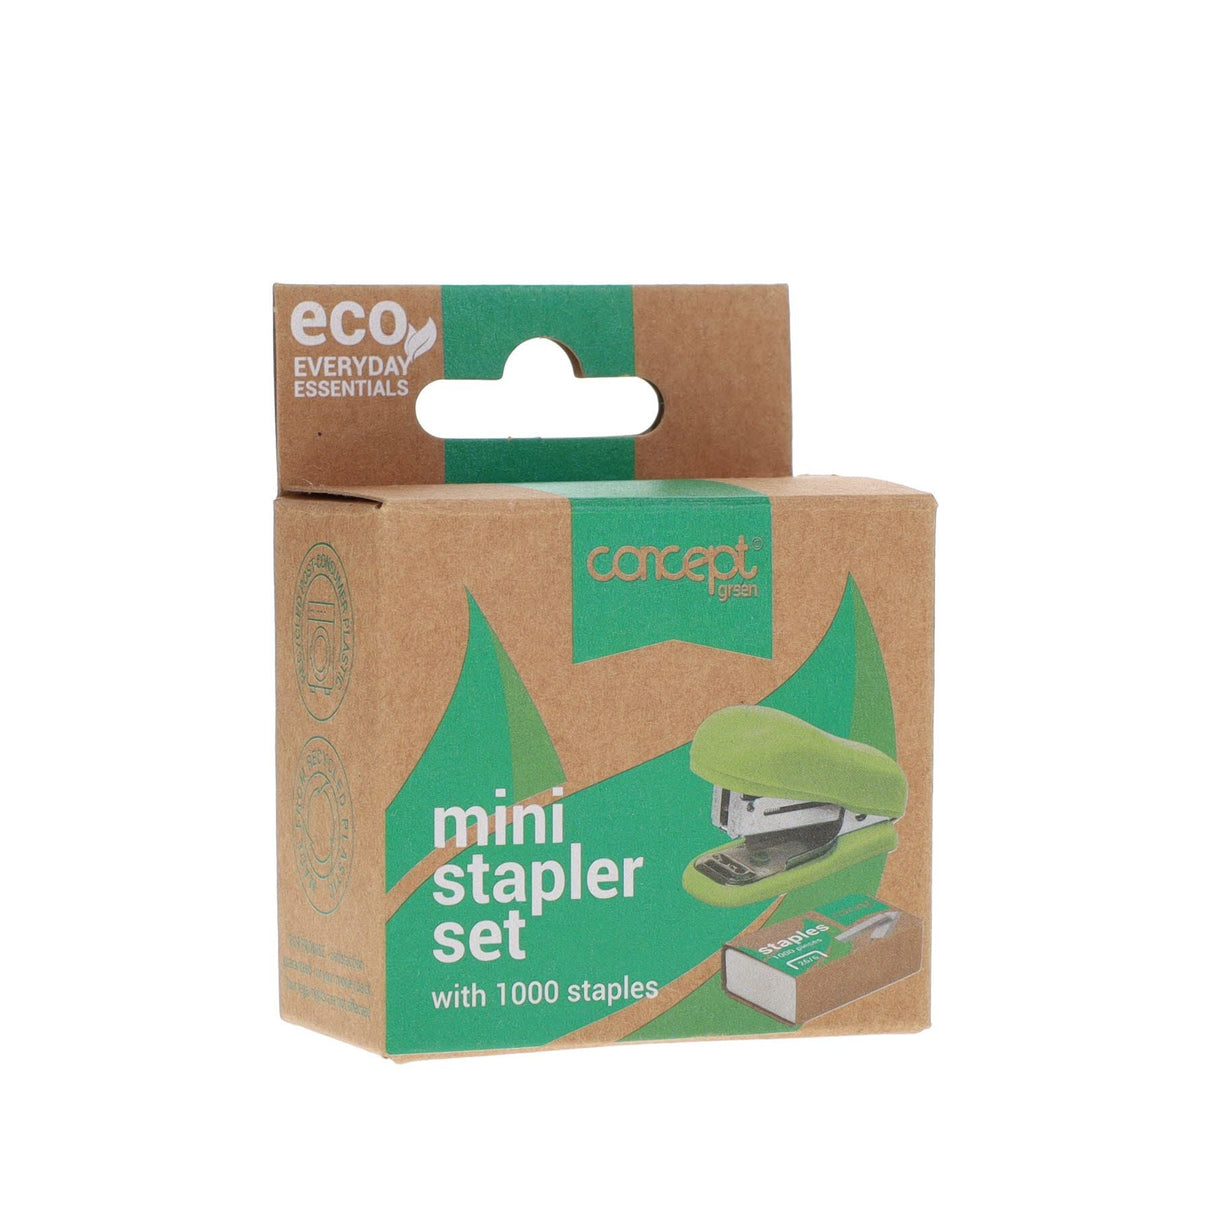 Concept Green Mini Stapler Set - 26/6 with 1000 Staples | Stationery Shop UK